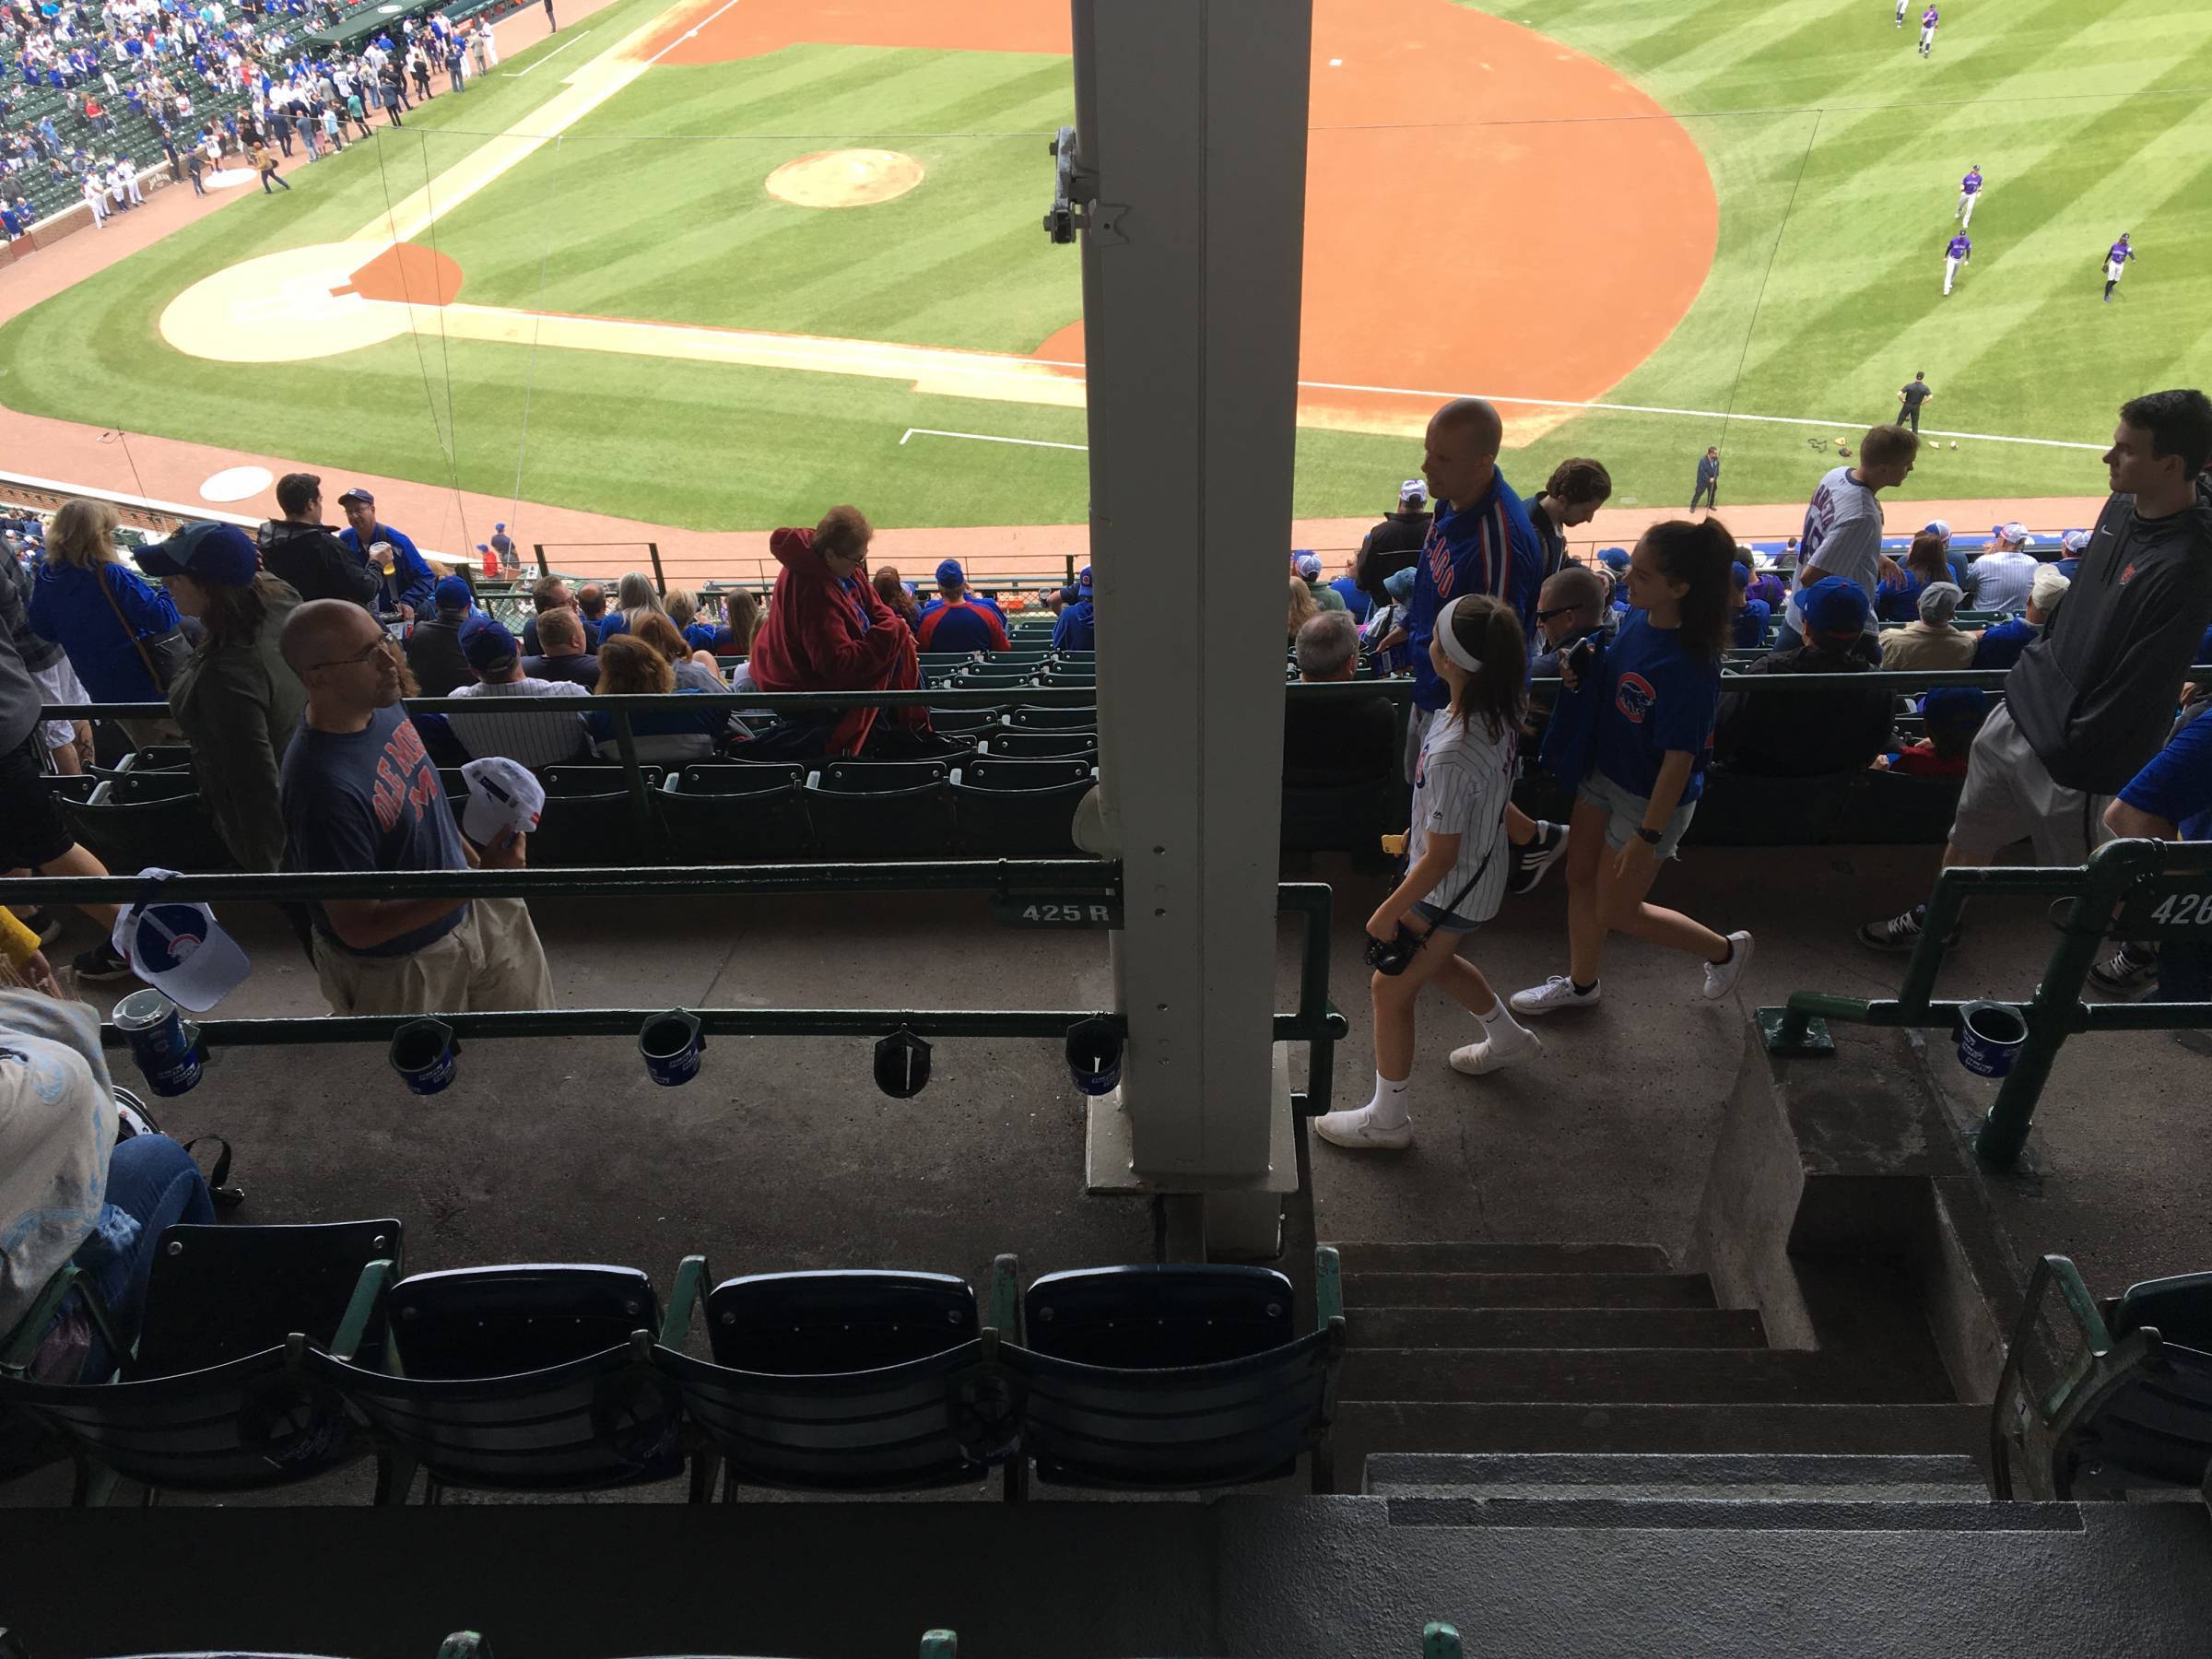 Pole in Section 425R at Wrigley Field